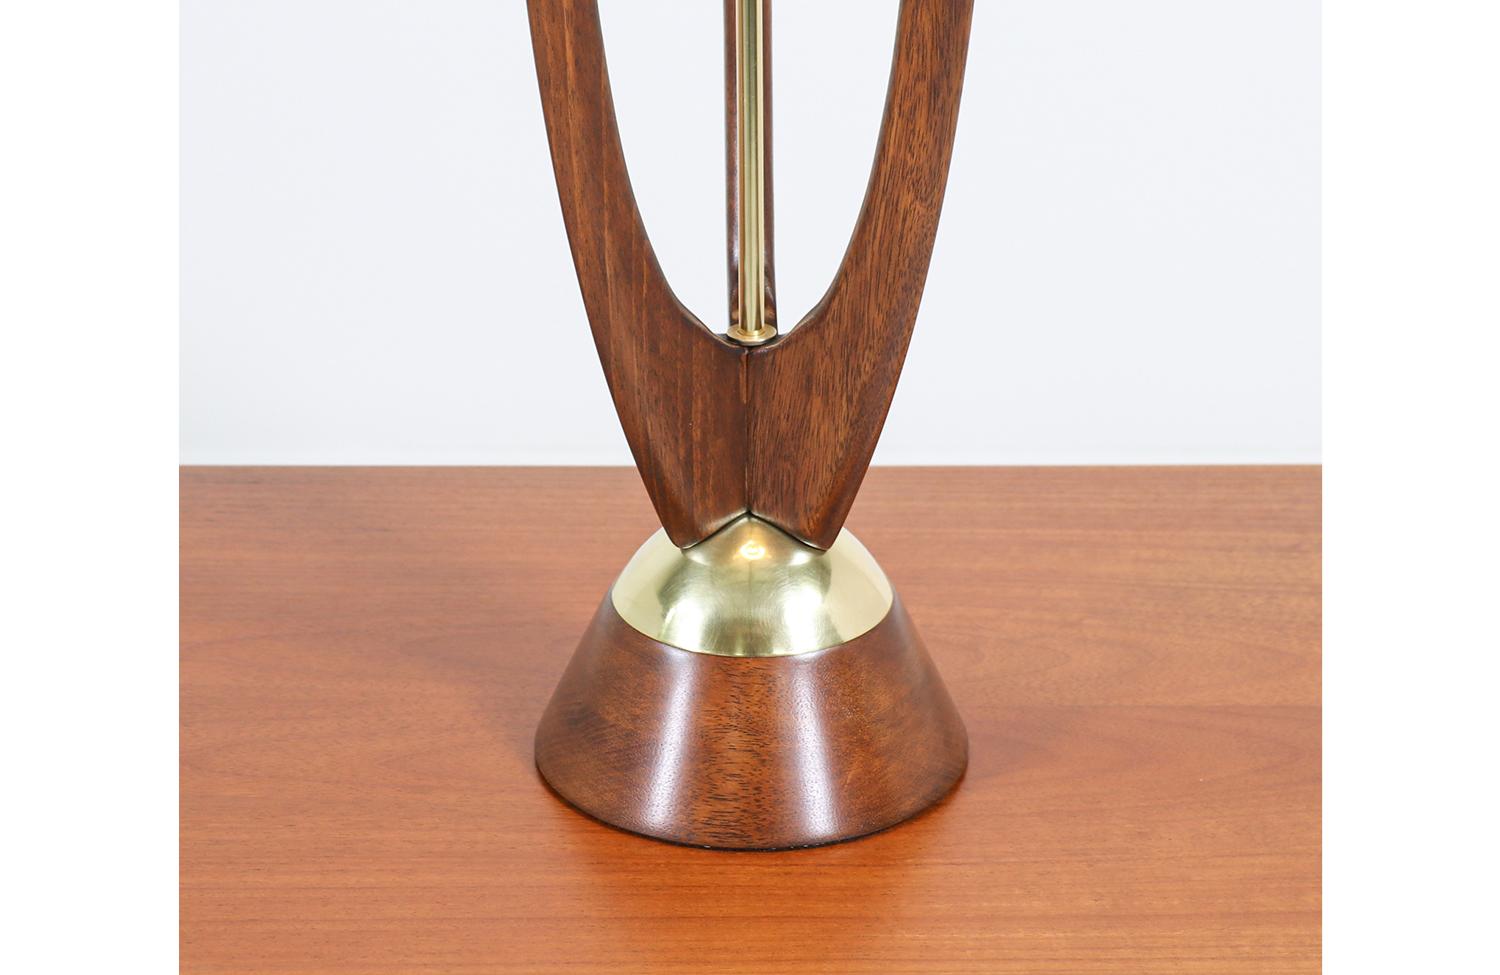 American John Keal Sculpted Walnut and Brass Table Lamp for Modeline